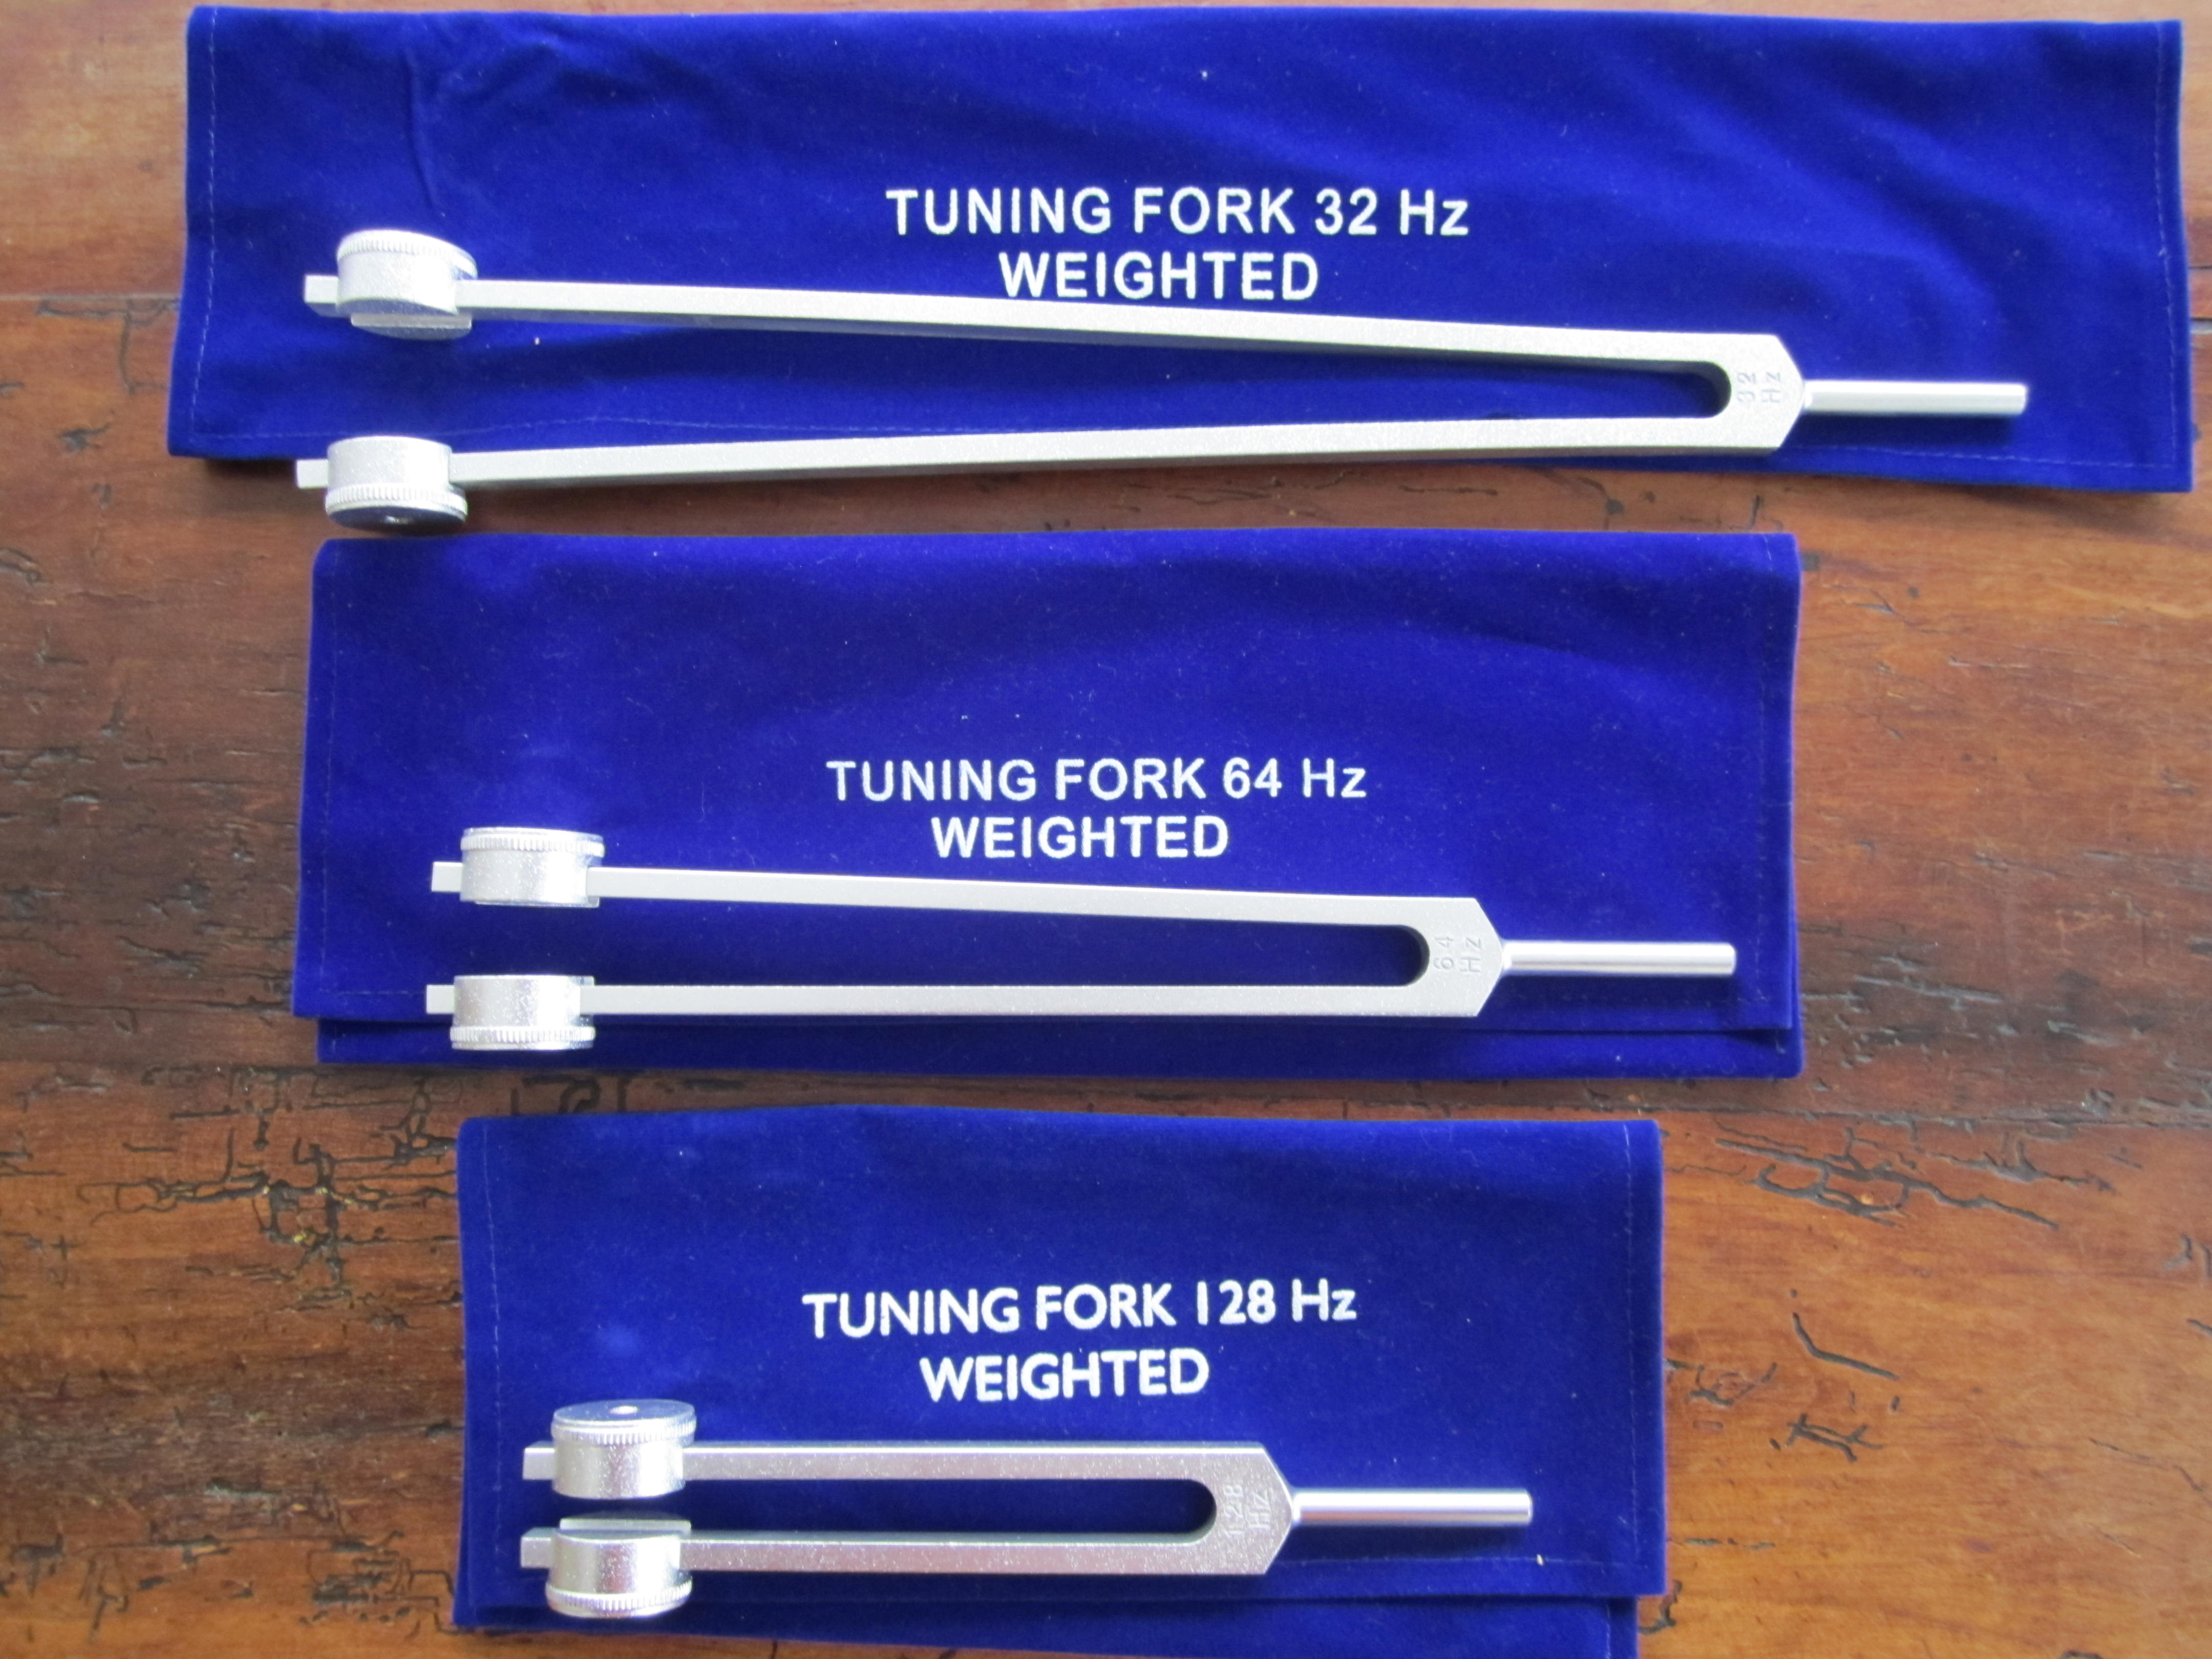 Tune fork. Tuning forks c128 Aesculap. Камертон Tuning fork. Камертон-а усилитель. Tuning fork Sound Therapy.